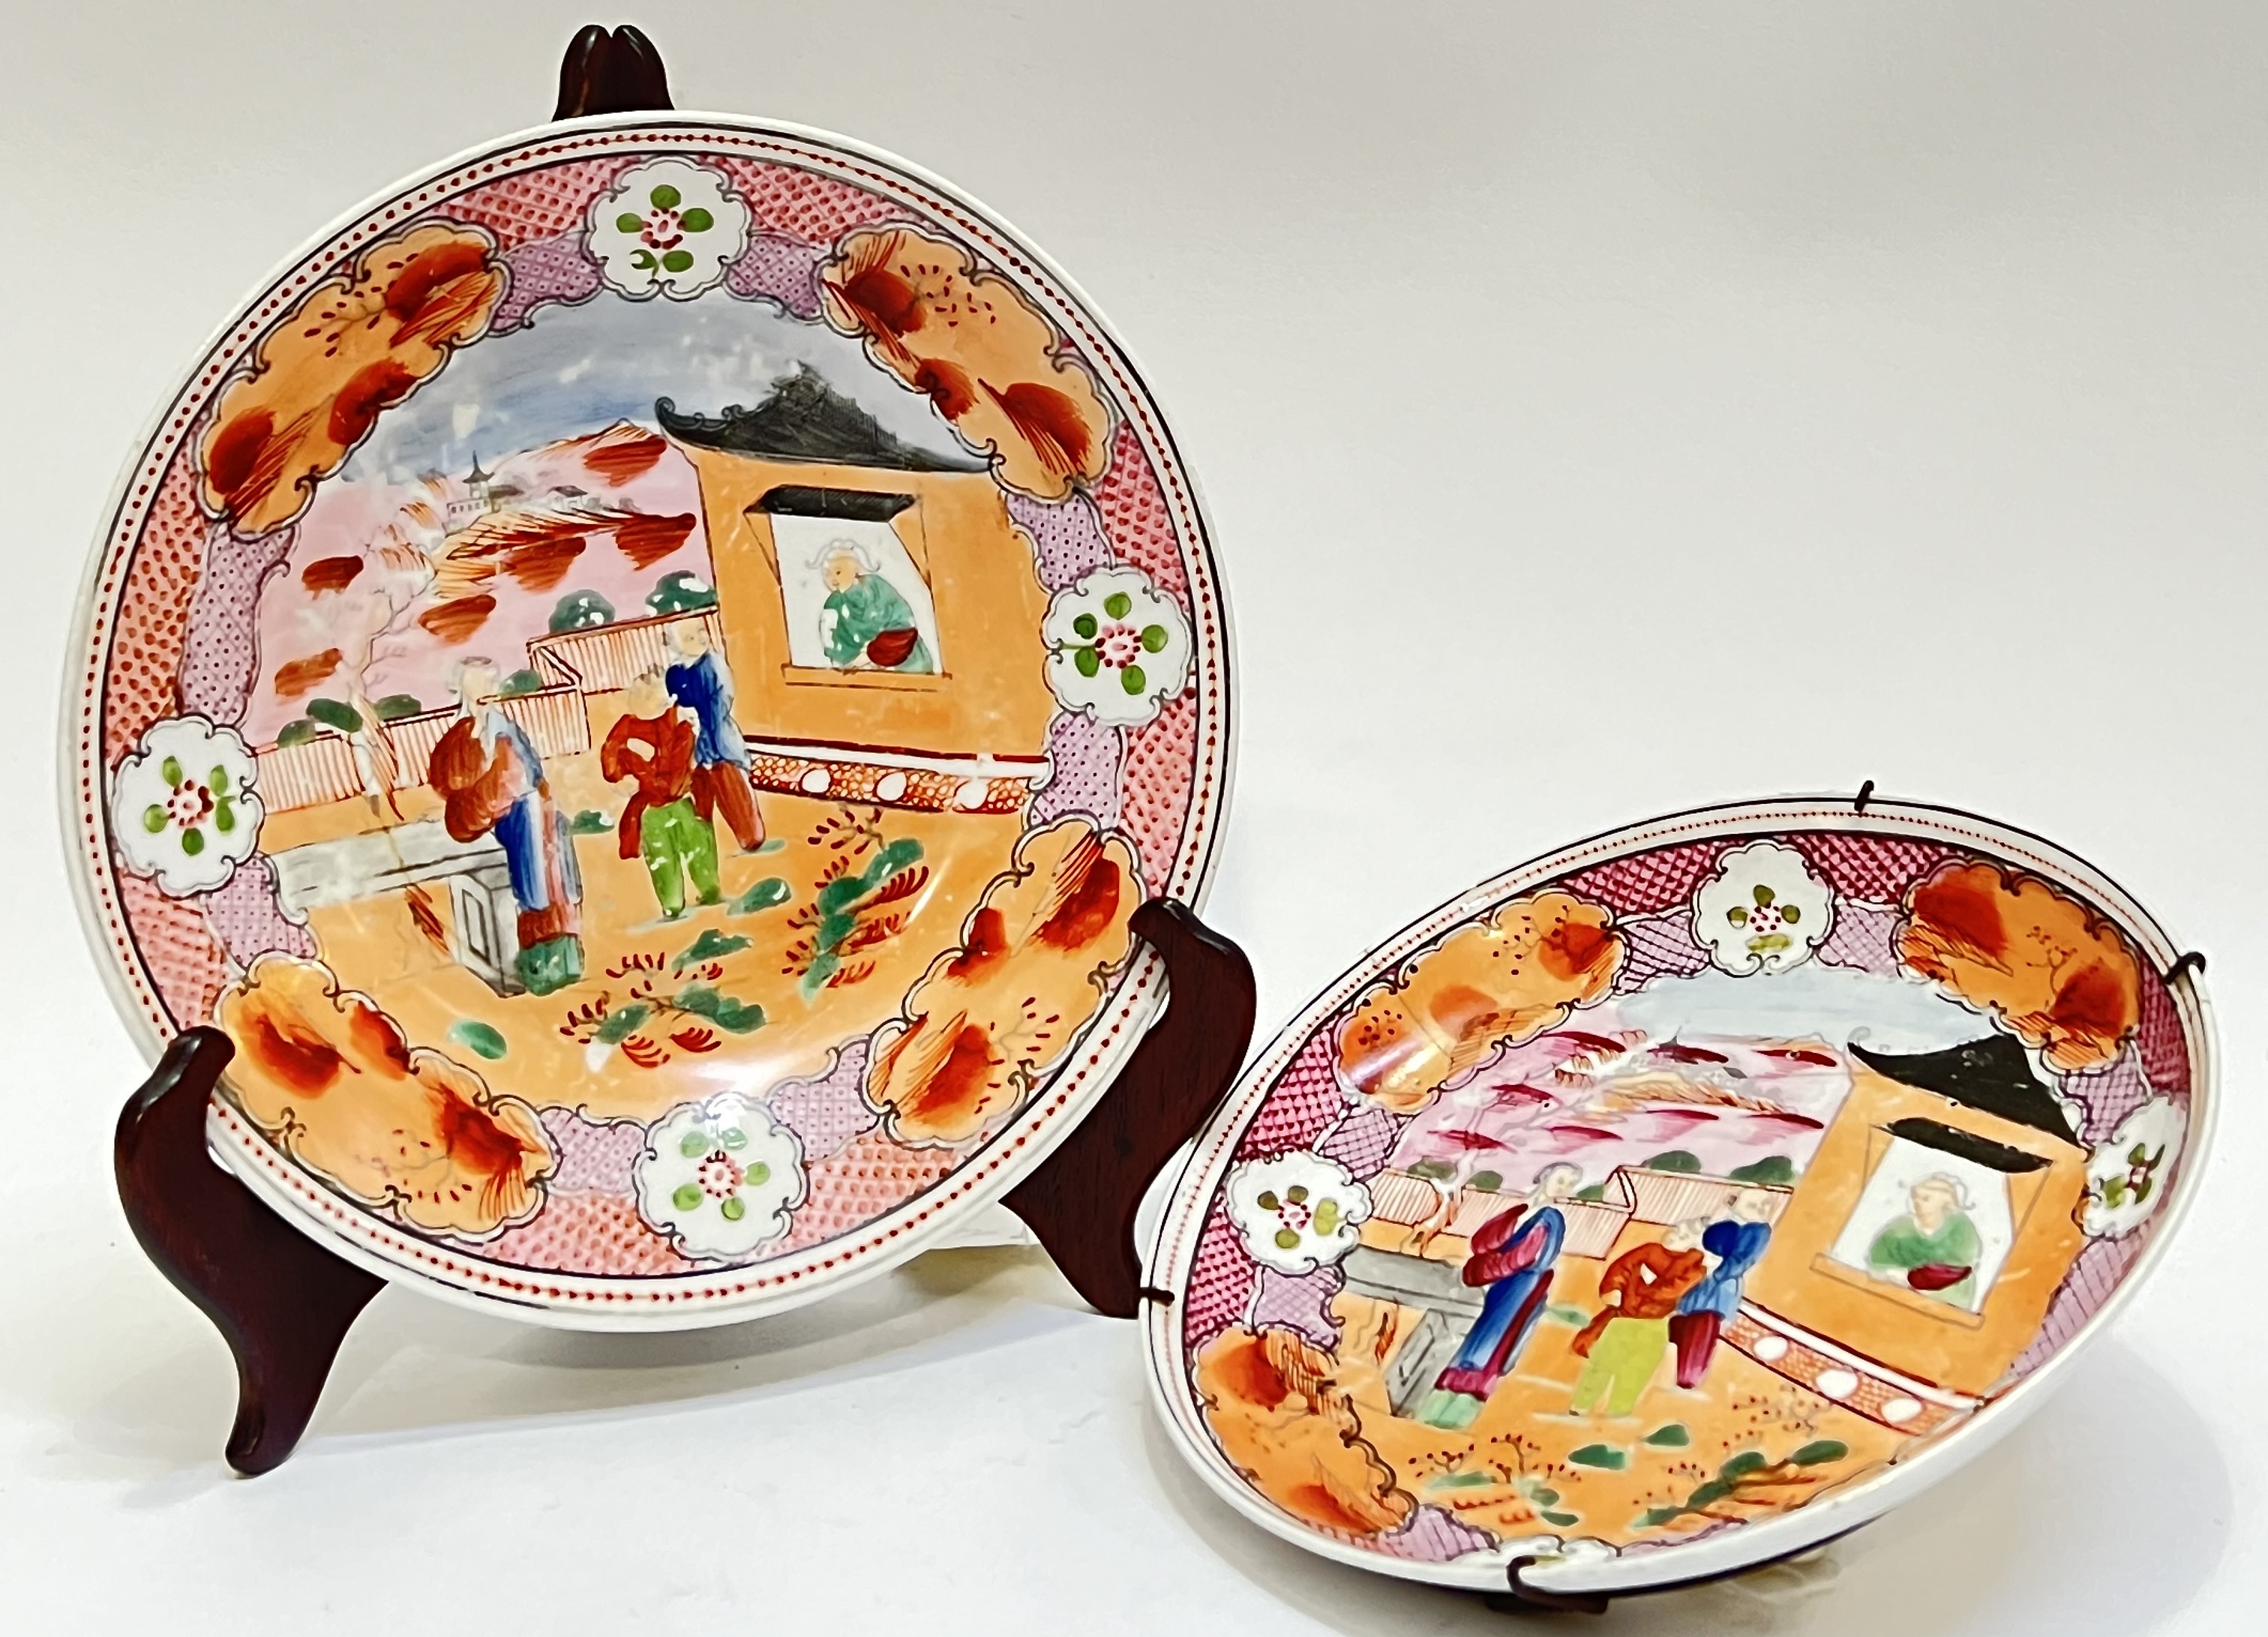 An early nineteenth century Newhall porcelain dish decorated n polychrome enamels with Chinoiserie